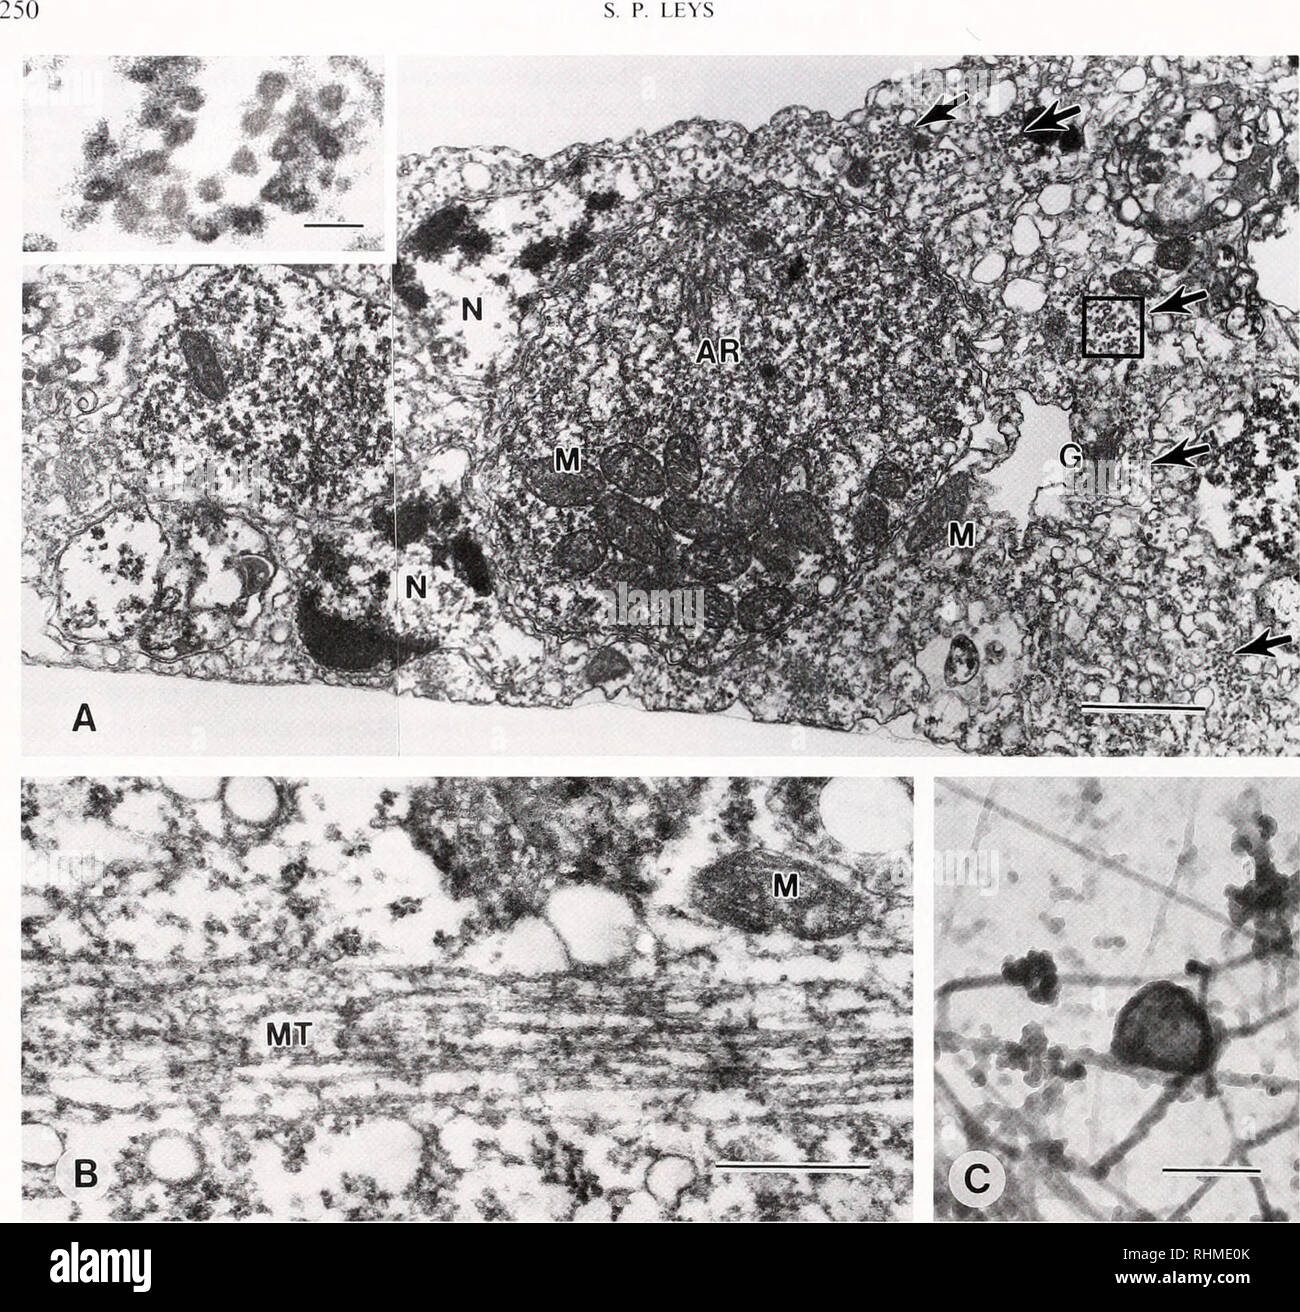 . The Biological bulletin. Biology; Zoology; Biology; Marine Biology. S. P. LEYS. Figure 7. Electron microscopy of adhered aggregates. (A) In cross section, cellular components (such as archaeocytes) lie within the multinudeated cytoplasm, which is surrounded above and below by a continuous membrane. Microtubule bundles lie at the surface of streams and throughout the tissue (arrows). Bar: 1 nm. Inset shows an enlargement of microtubules from within the box. Bar: 0.1 jim. Nuclei, N; archaeocyte, AR; Golgi, G; mitochondria, M. (B) Horizontal section through a stream showing a bundle of microtub Stock Photo